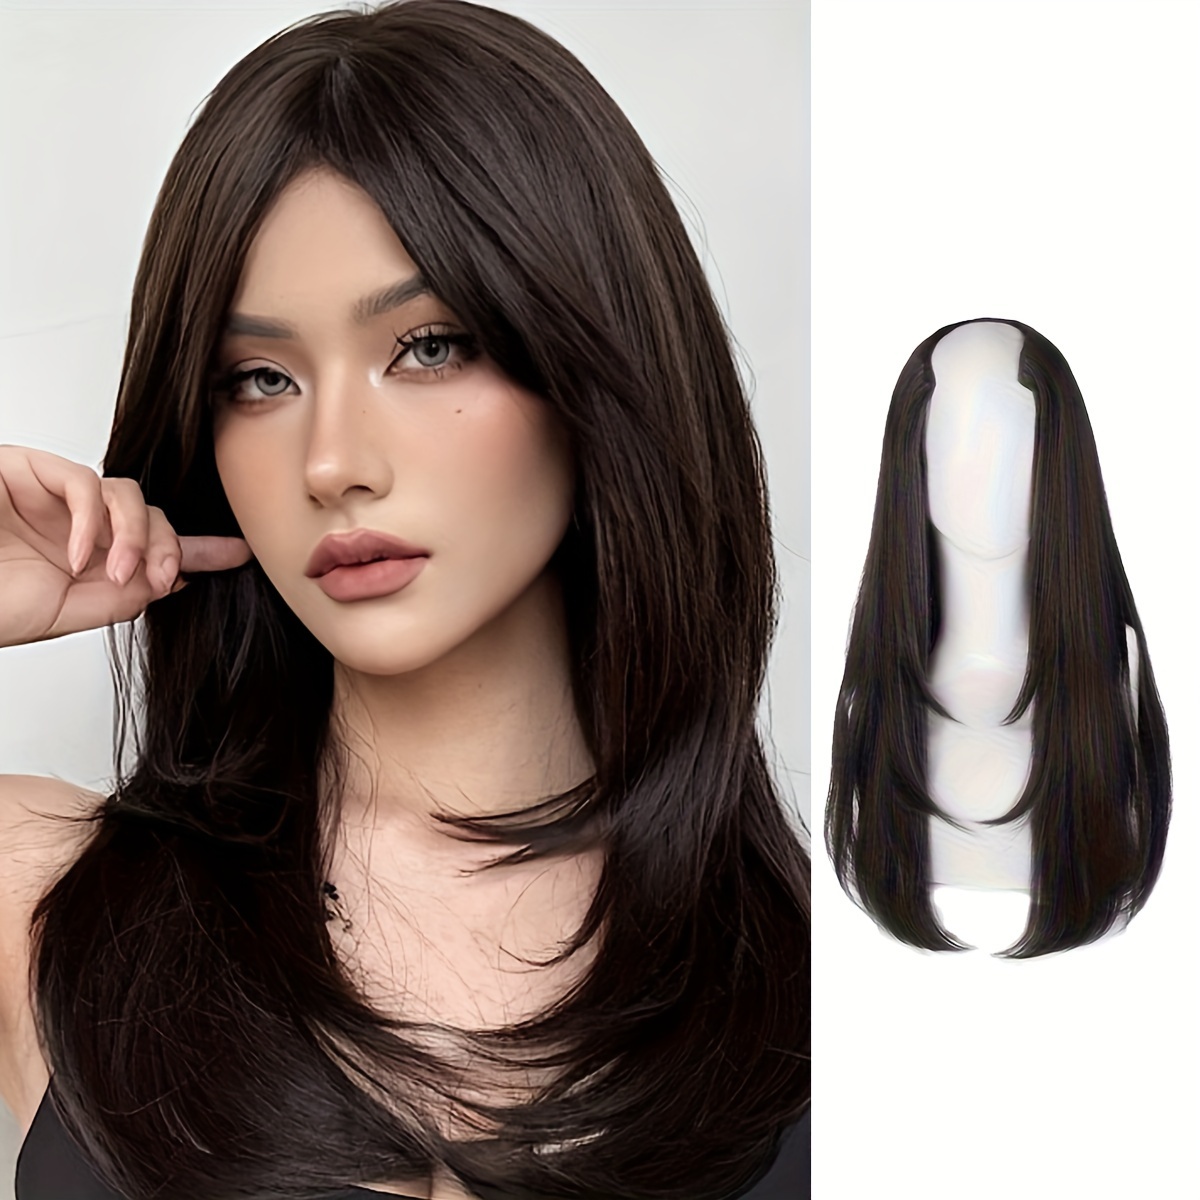 FOR Women's V-Shaped Long Hair Extension Synthetic Wig Layered Hair  Extension Hair Pad Fluffy Top Increase Hair Volume